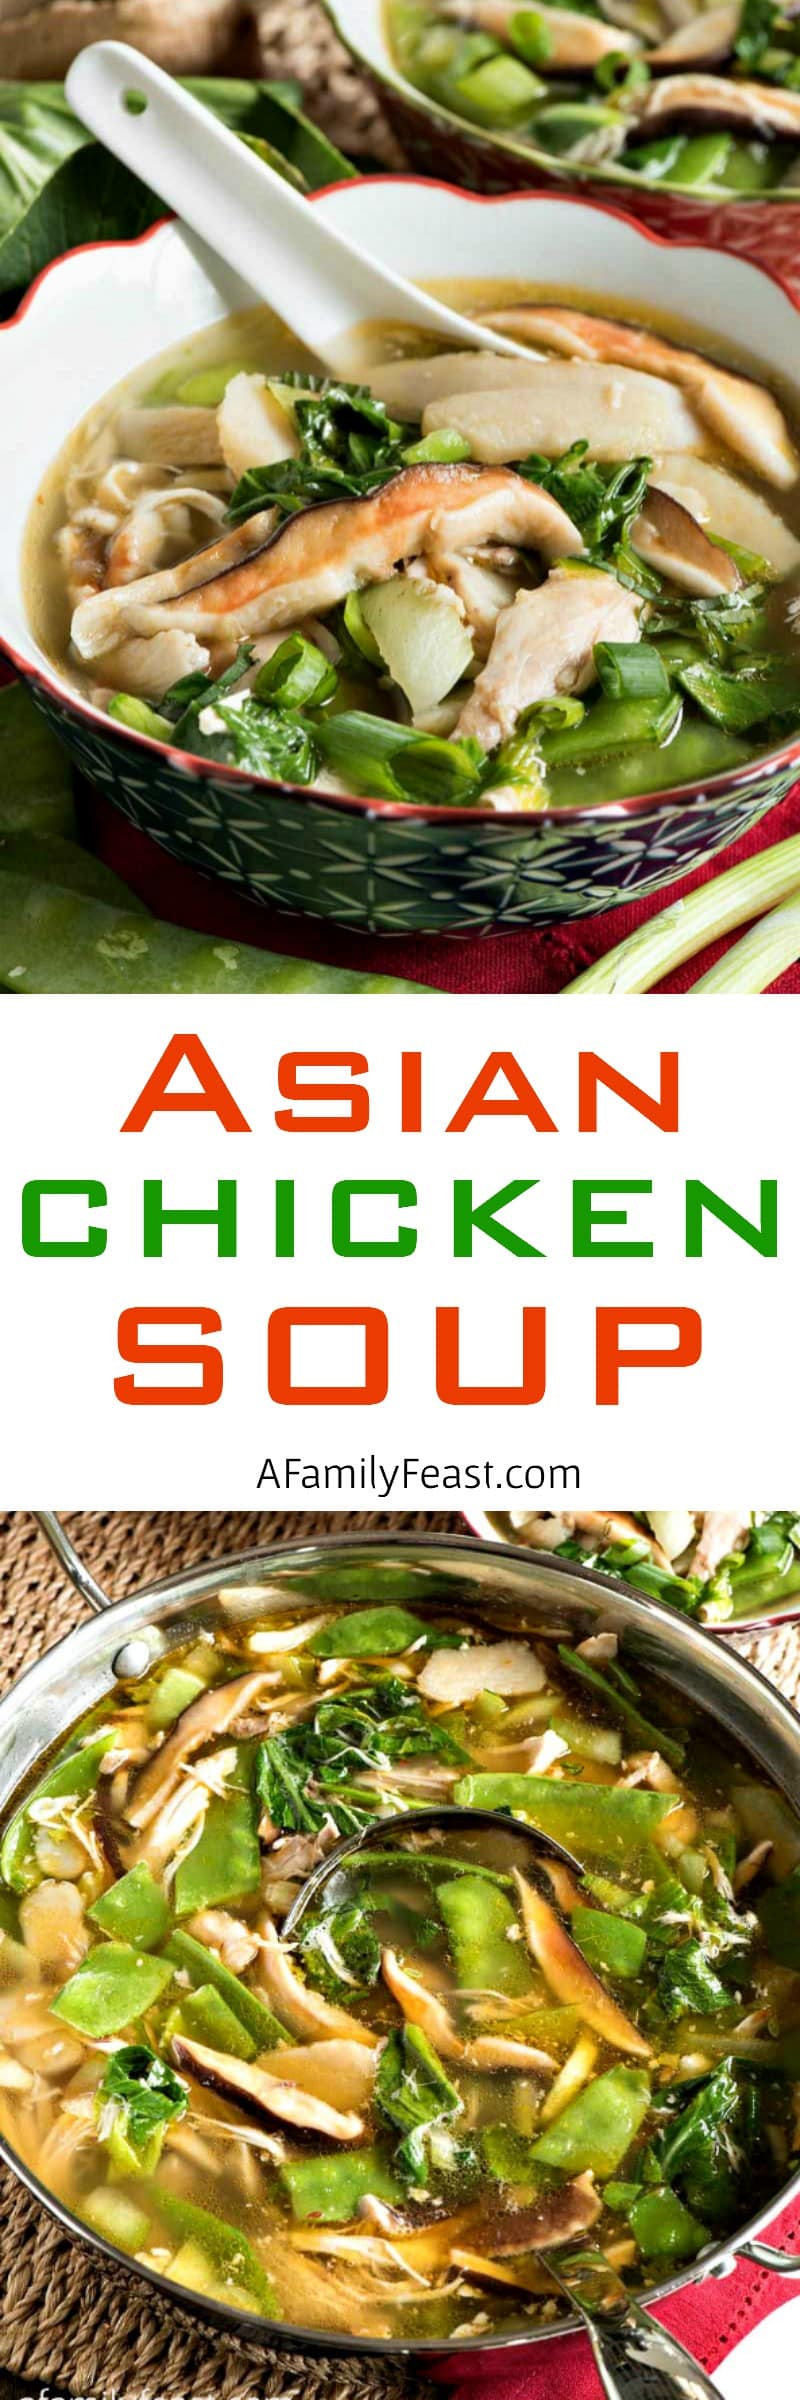 This Asian Chicken Soup is easy to make and full of healthy, delicious ingredients!